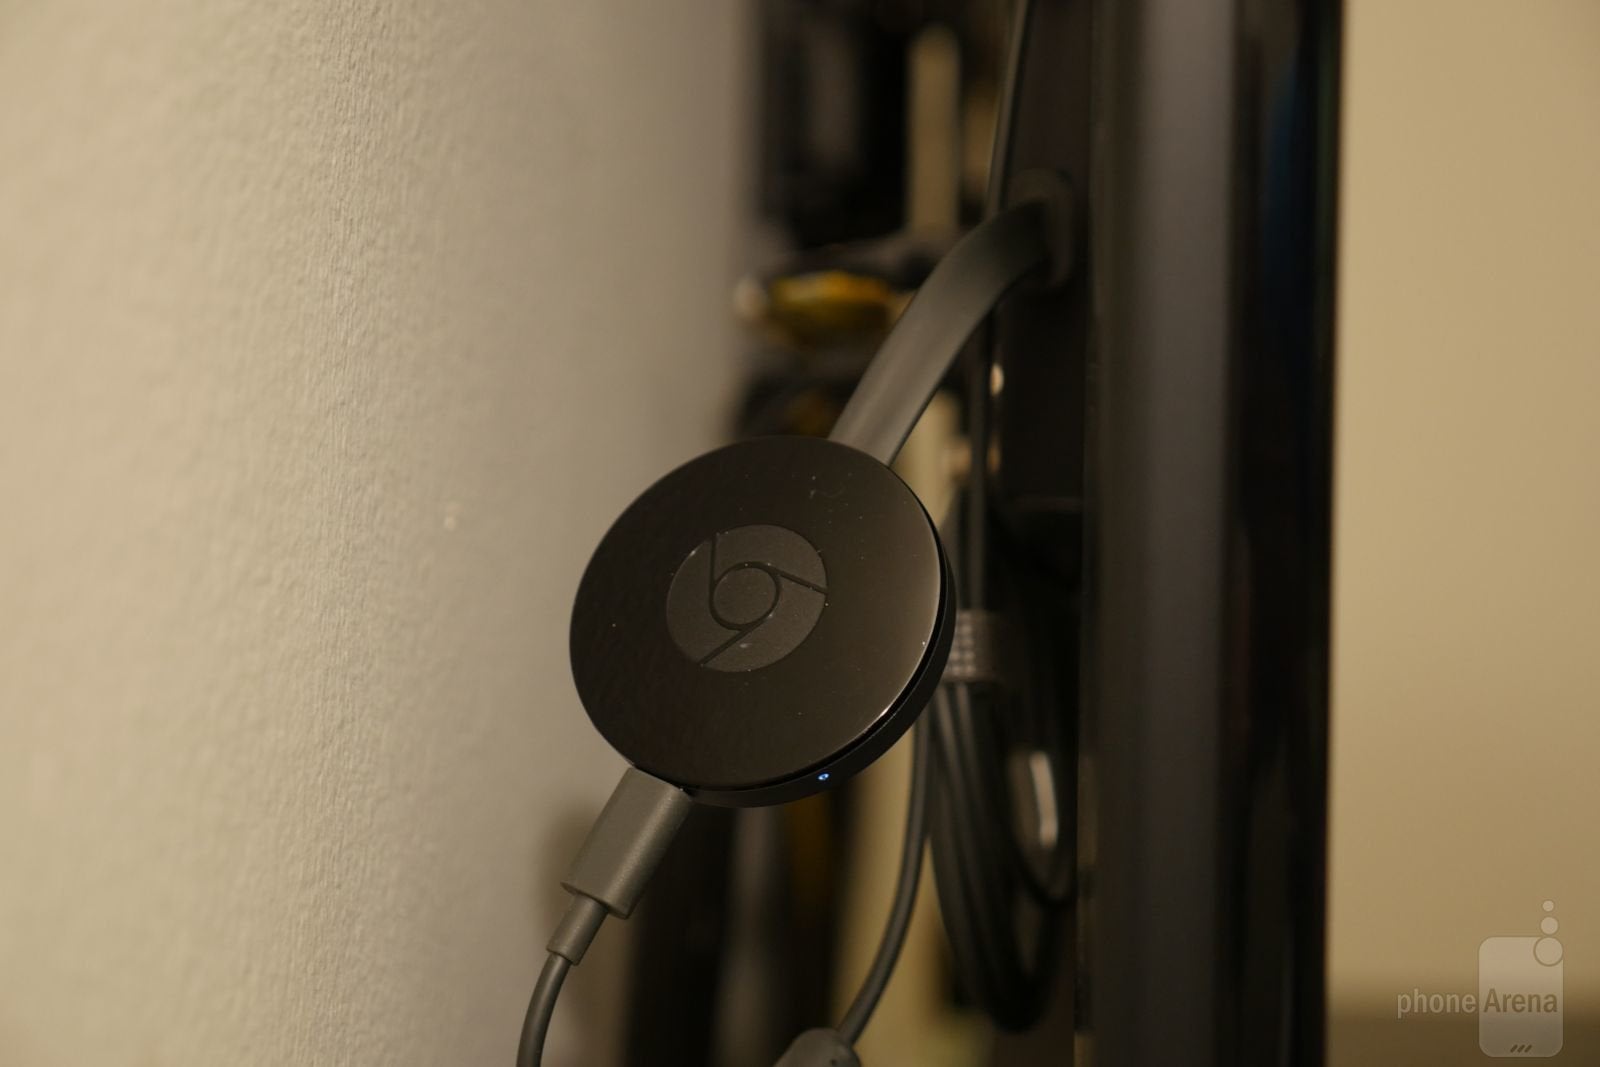 For Android smartphones, the most convenient way of connecting it to an external display is using a Google Chromecast for a wireless connection."&nbsp - How to quickly turn your smartphone into a desktop PC